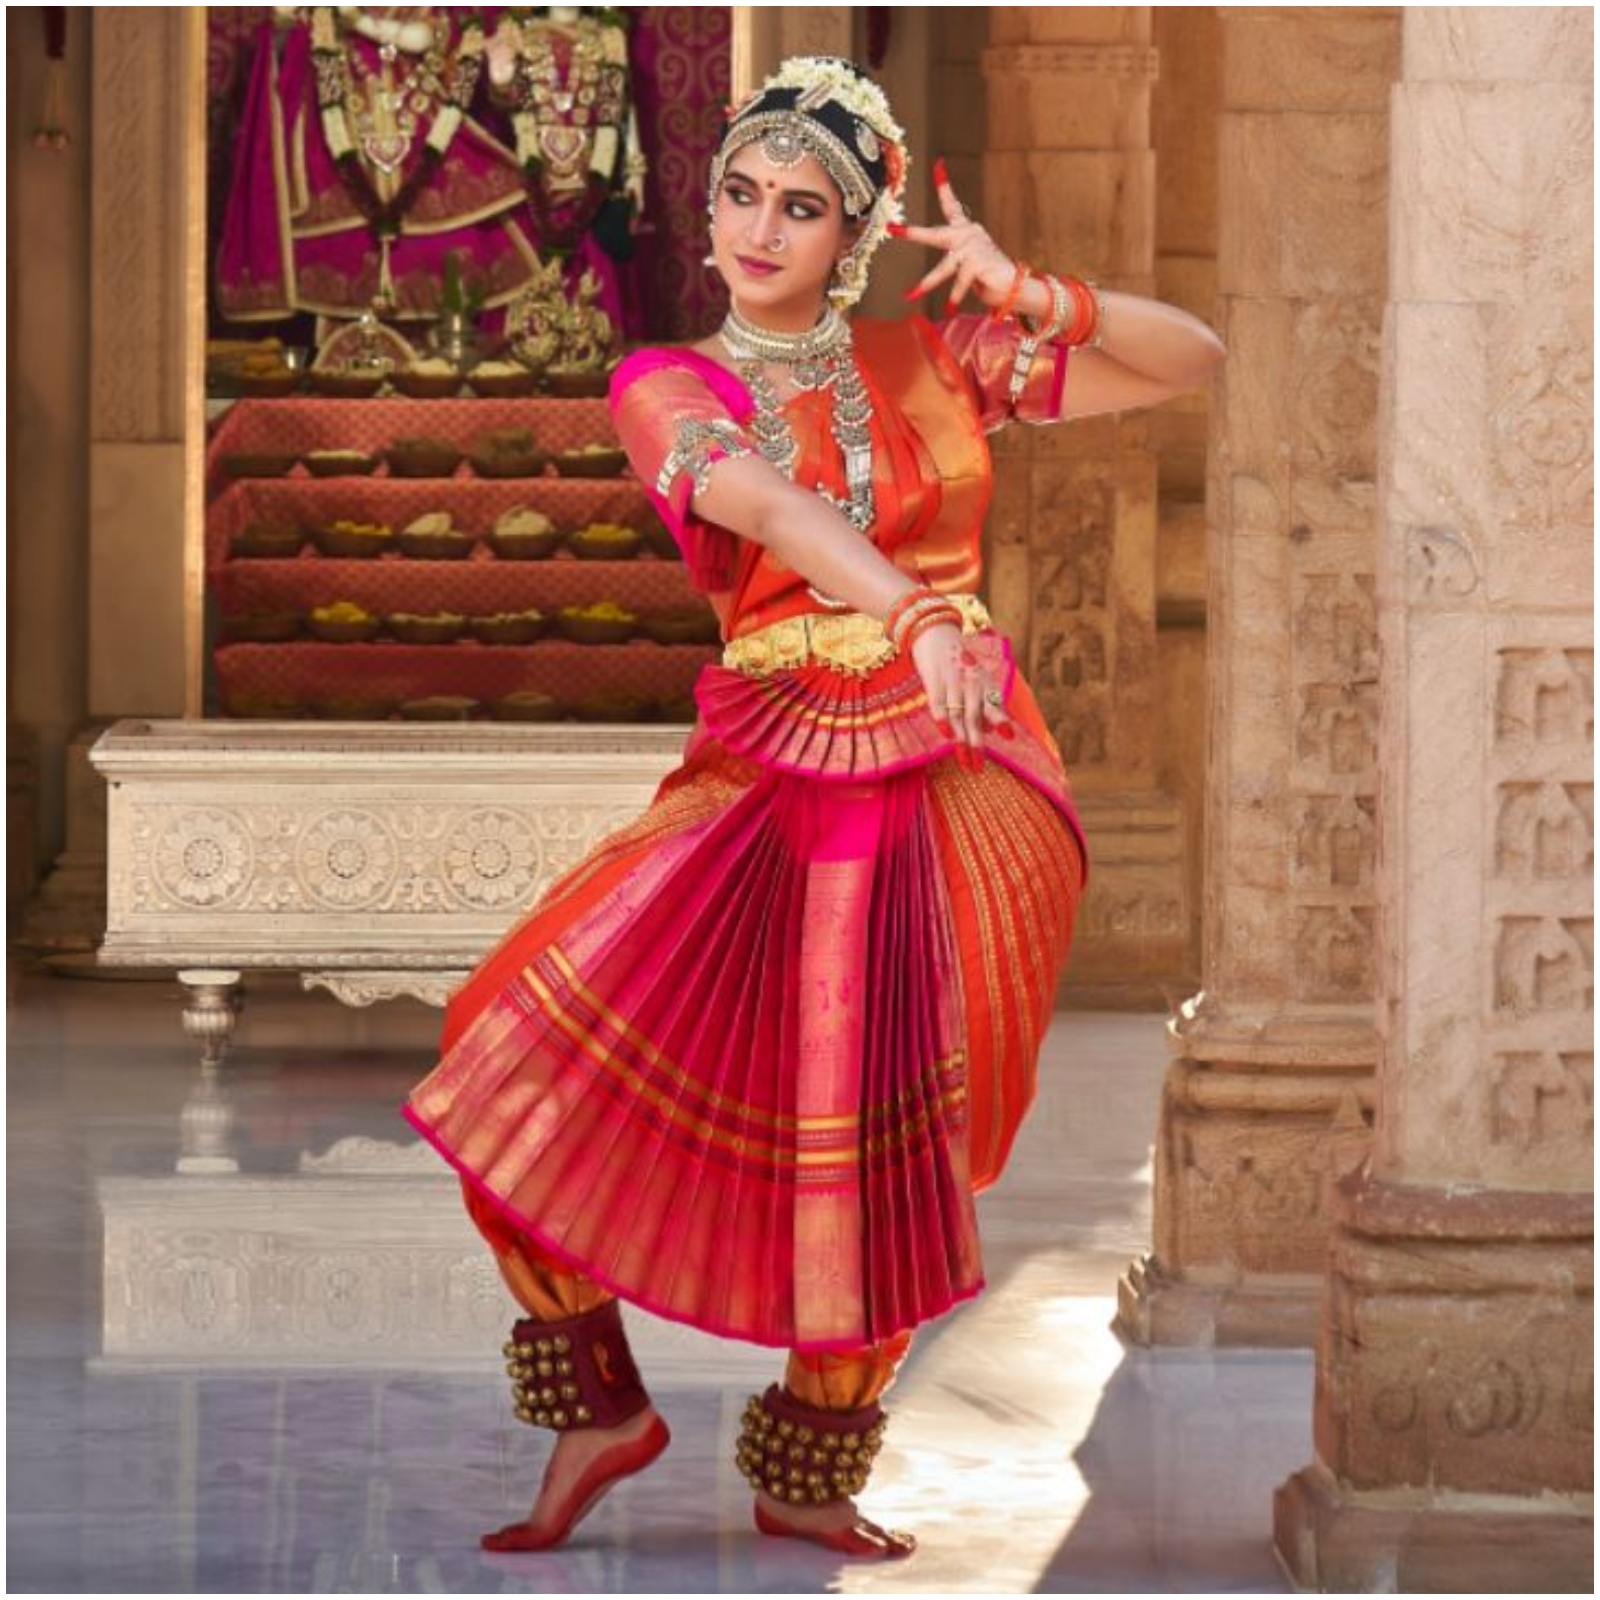 Radhika Merchant’s performance consisted of all the traditional elements of the Arangetram performance.